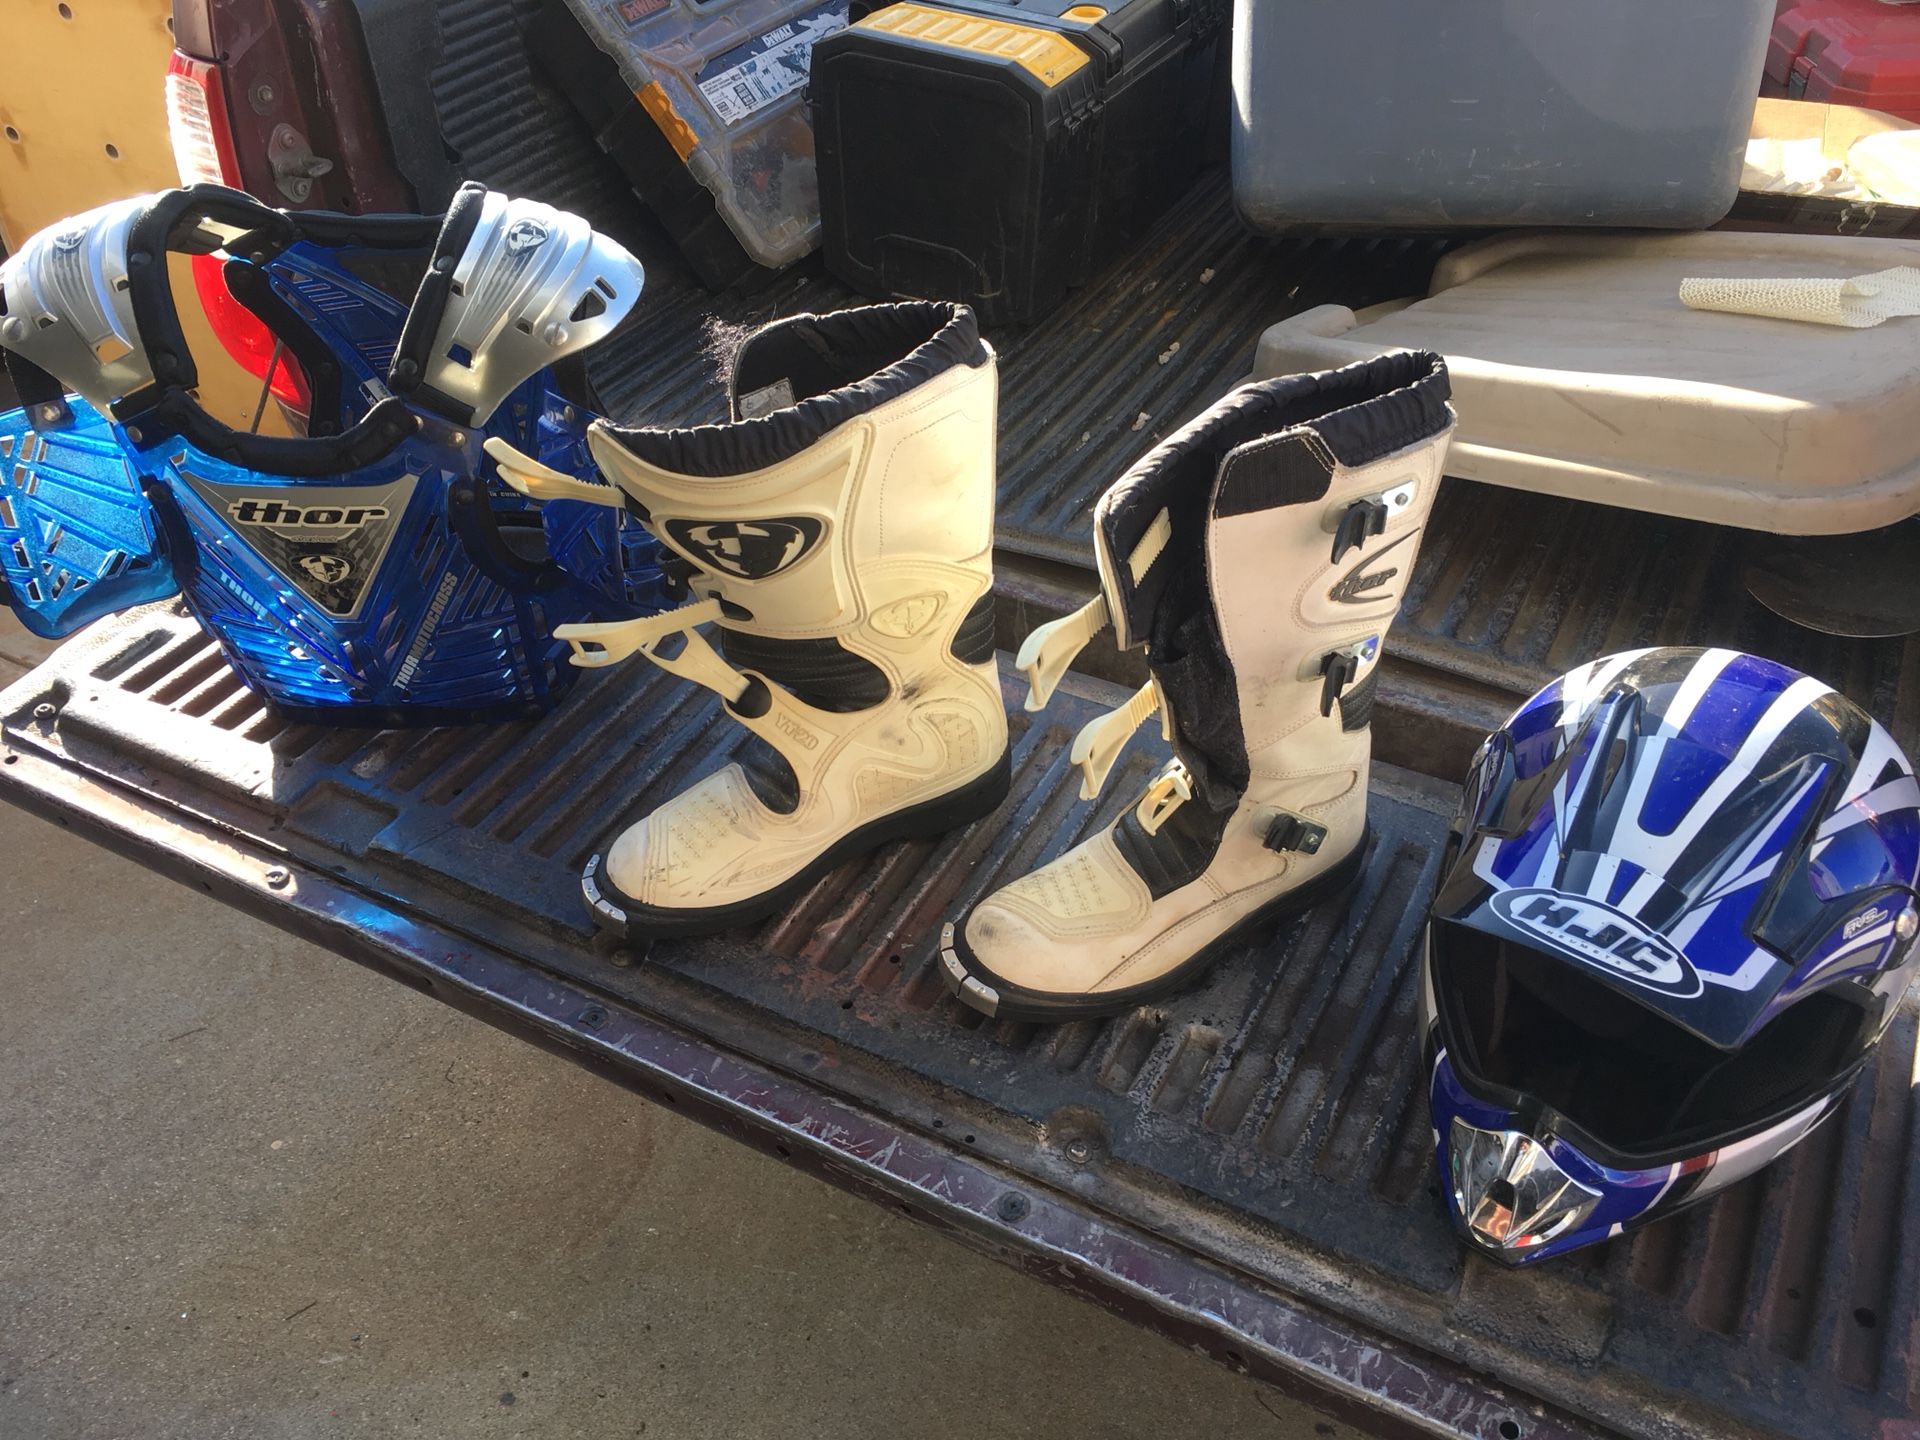 Youth Motocross Gear Thor Boots Thor Chest Guard HJC Helmet